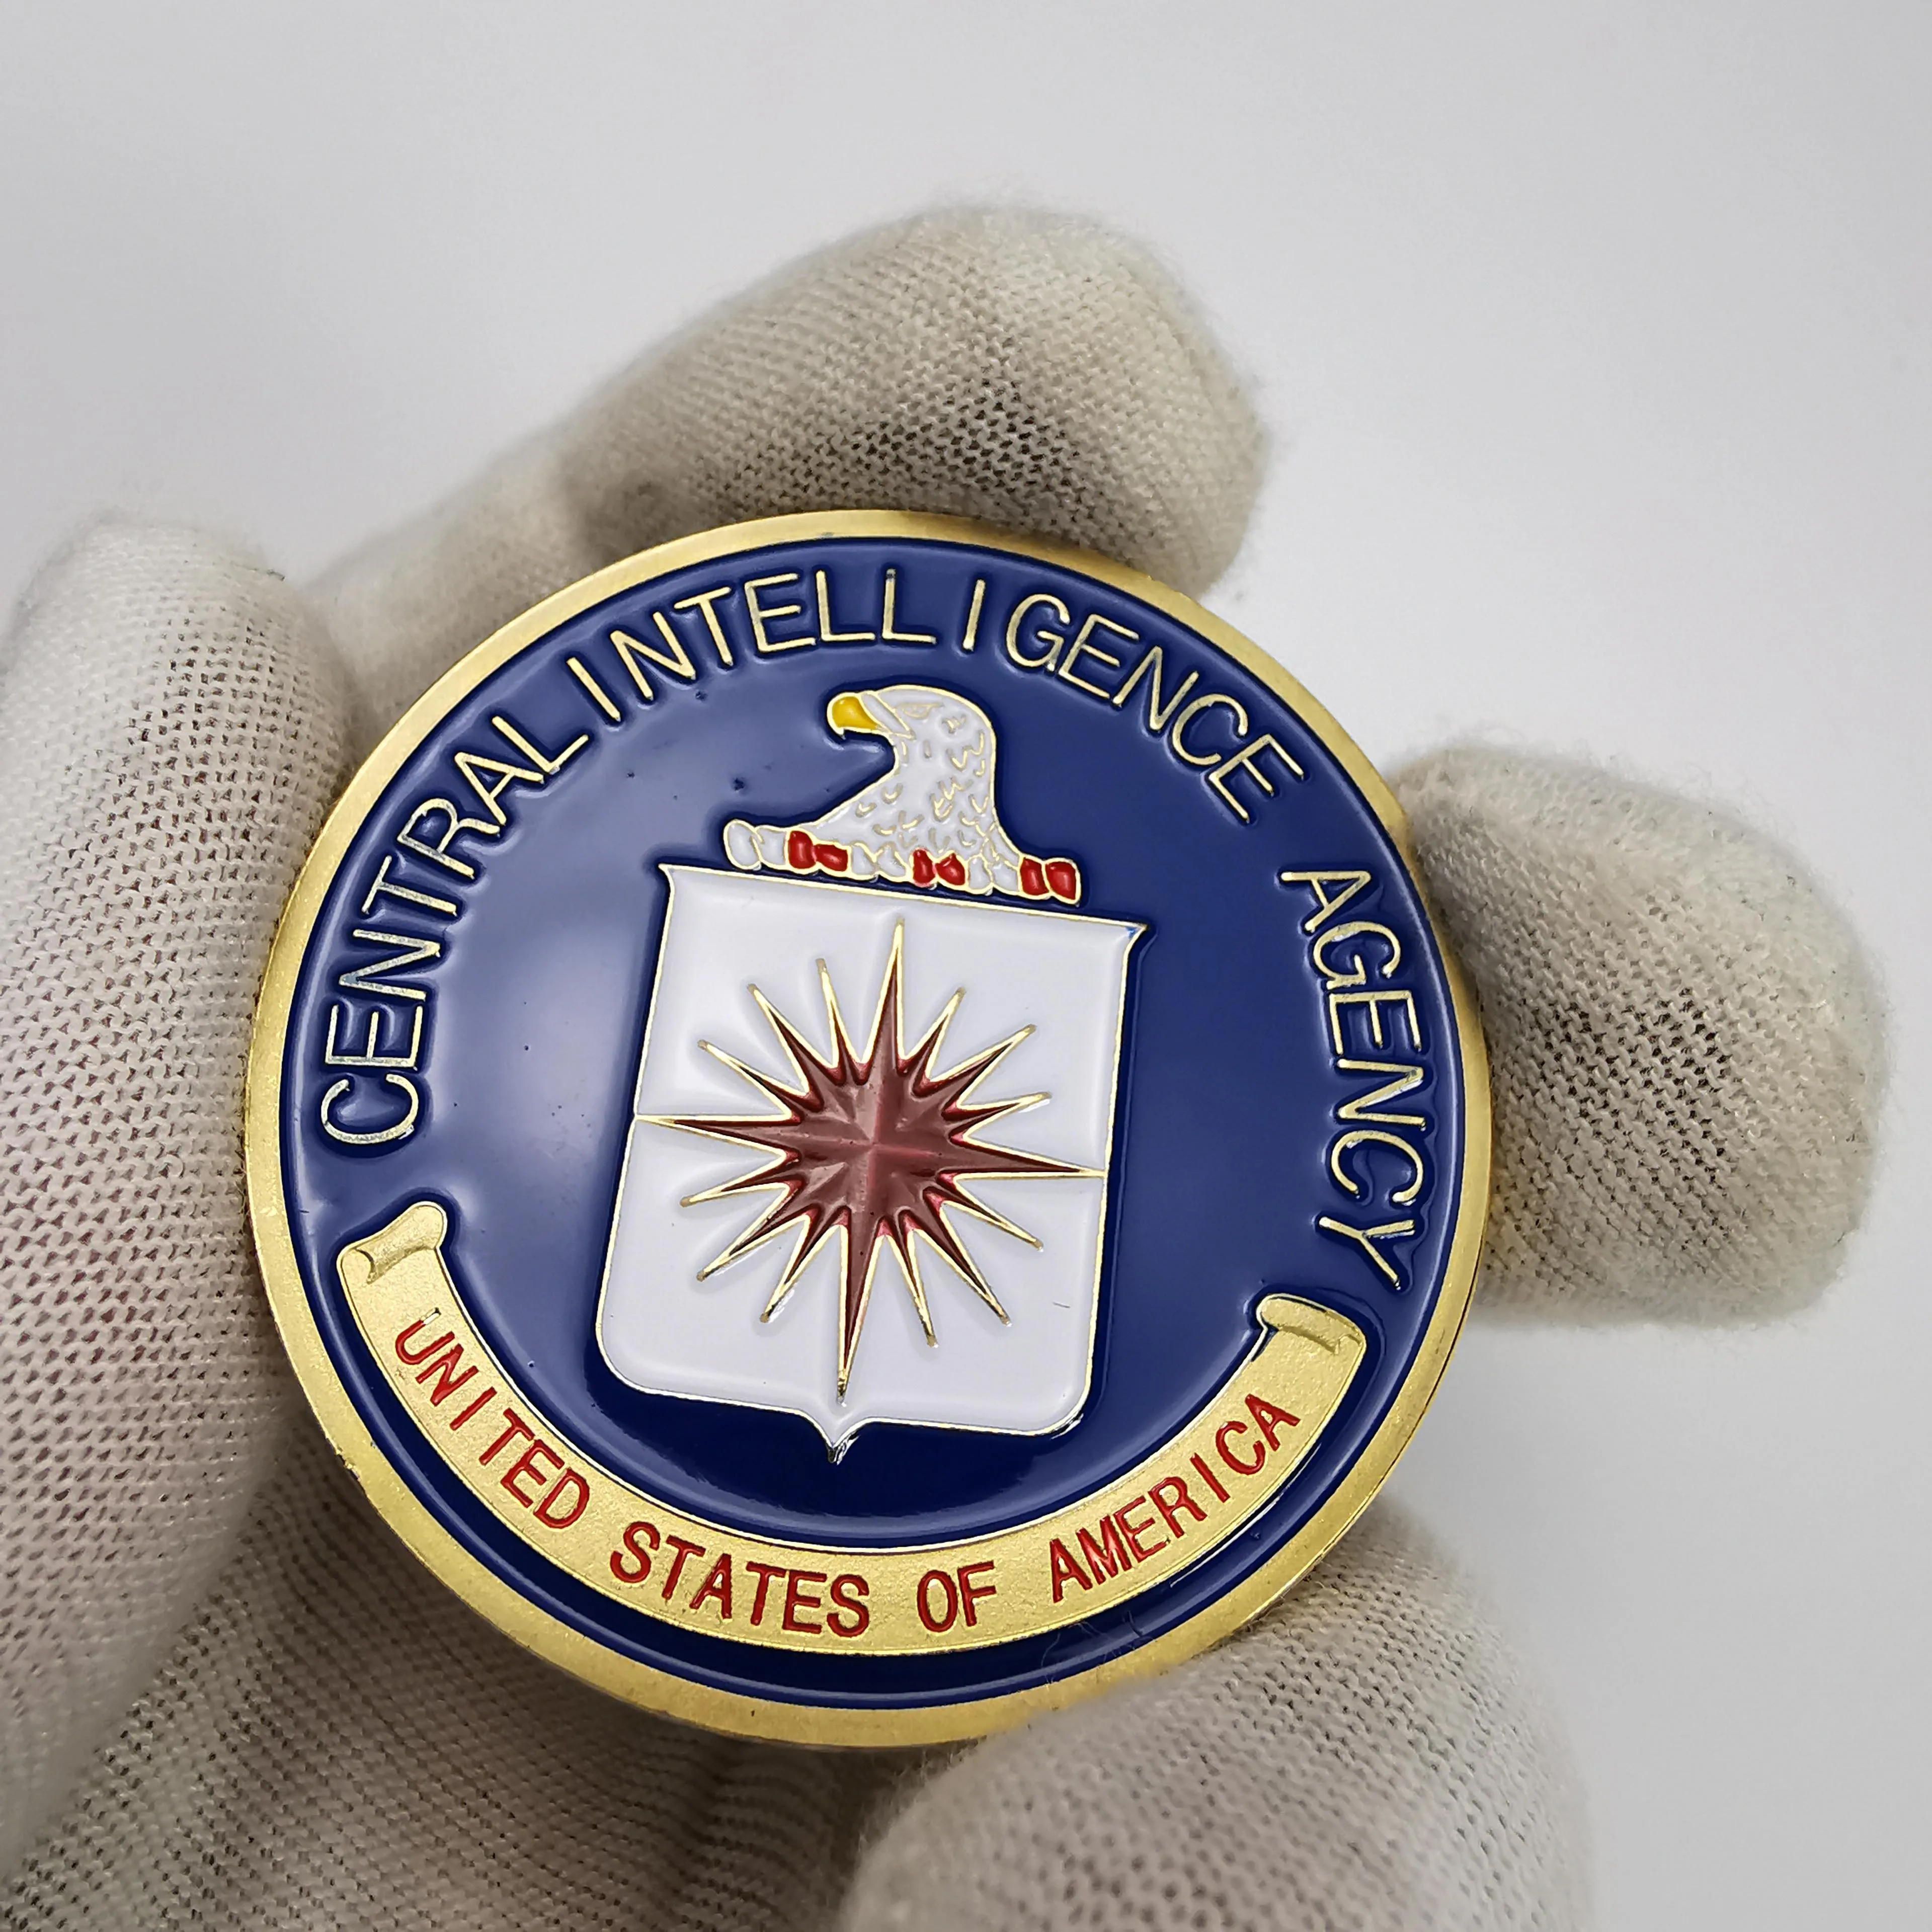 

United States of America Central Intelligence Agency Souvenir Coin Gold Plated Collectible Challenge Coin Commemorative Coin